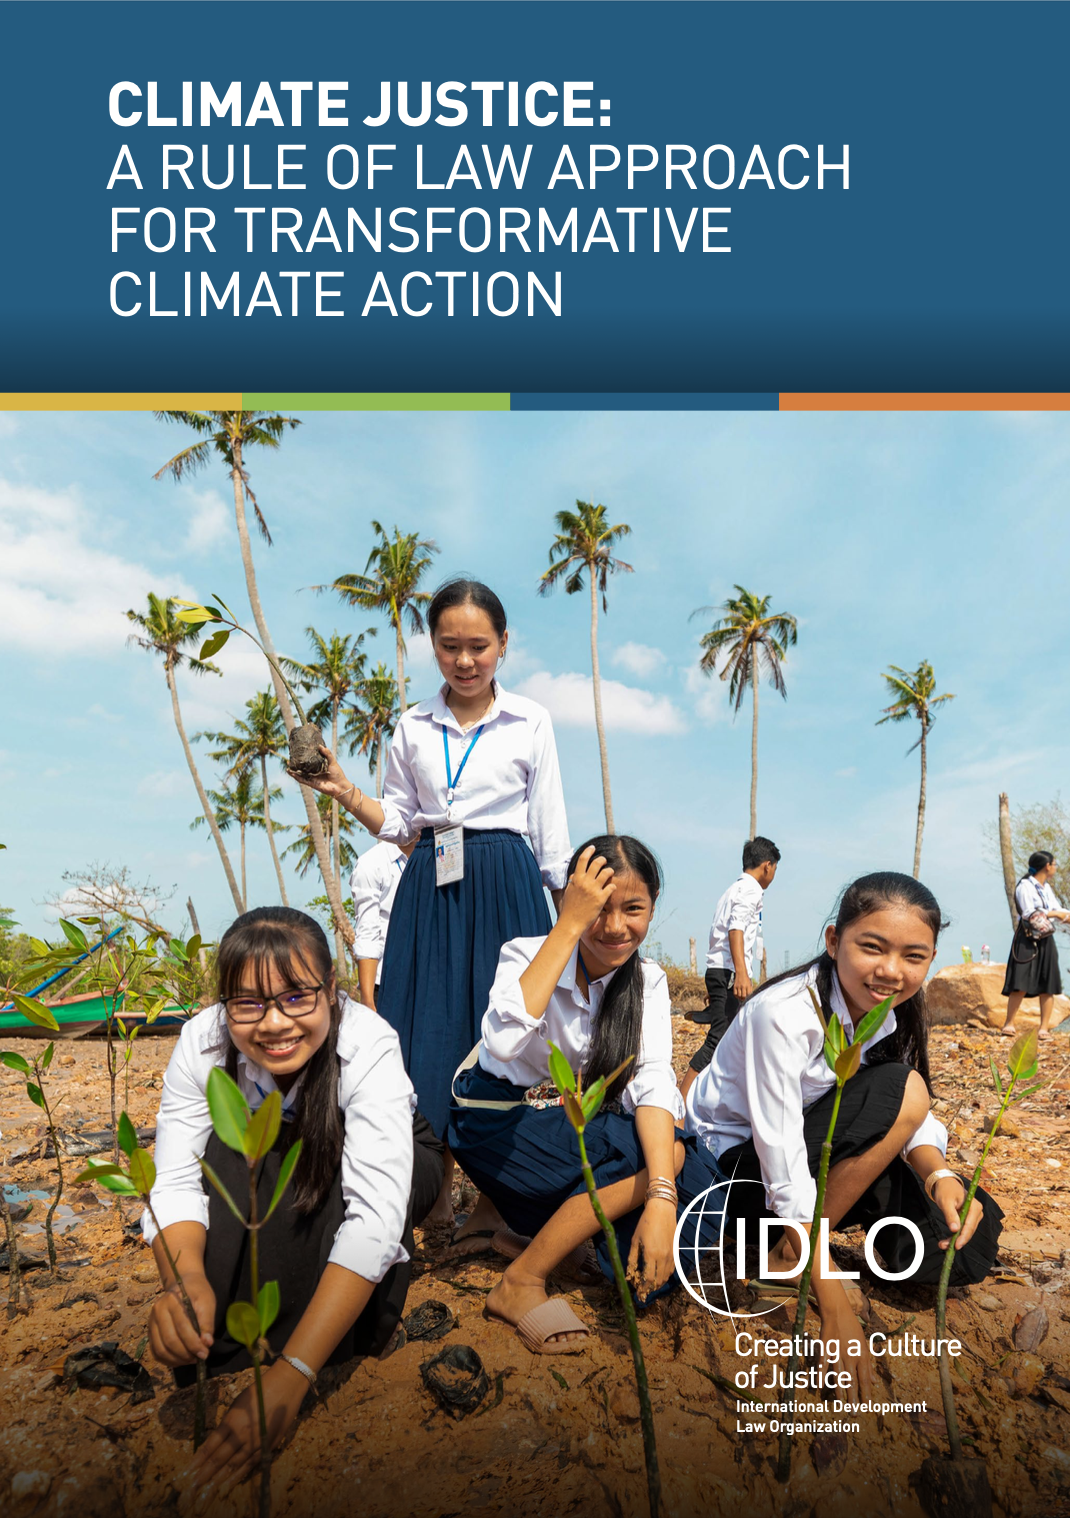 Climate Justice: A Rule of Law Approach for Transformative Climage Action